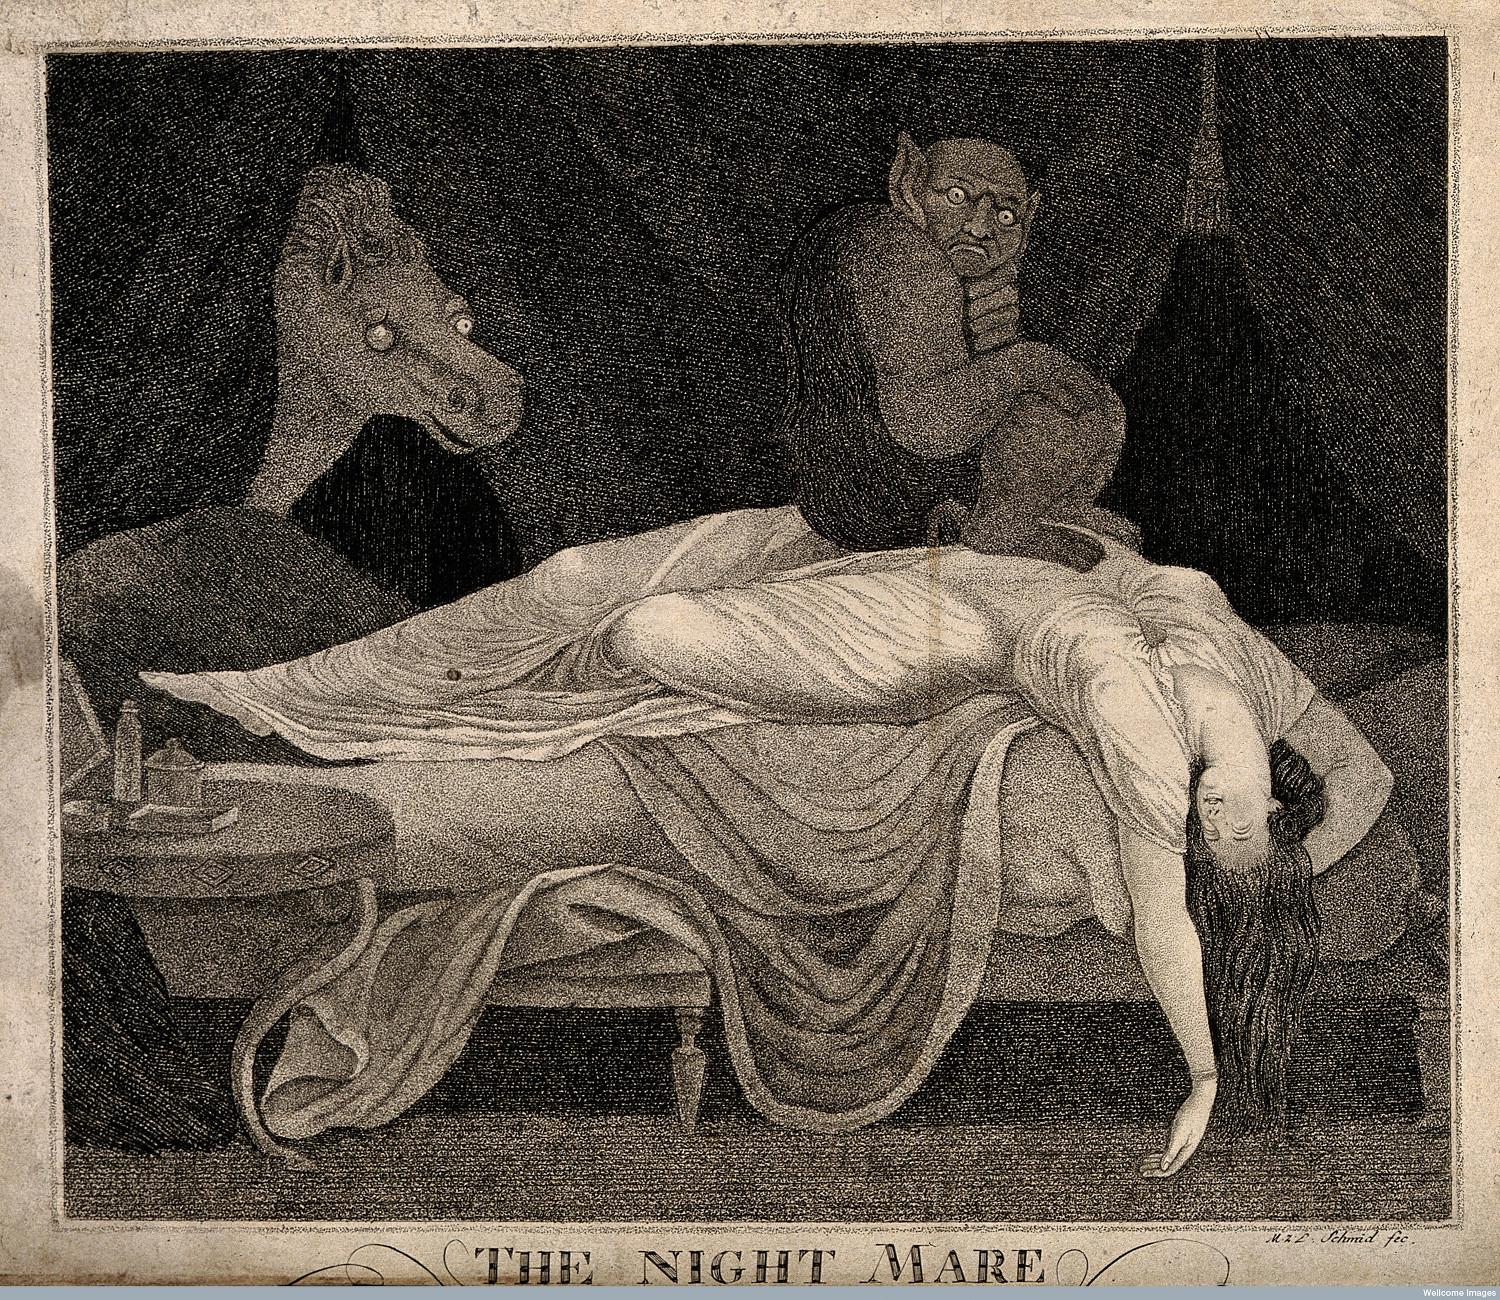 In this engraving by Martin Joachim Schmidt, a devil sits on a sleeping woman’s stomach. Historically, sufferers of sleep paralysis often claimed it felt like a demon or witch was perched on their chest. Image courtesy of the Wellcome Library, London